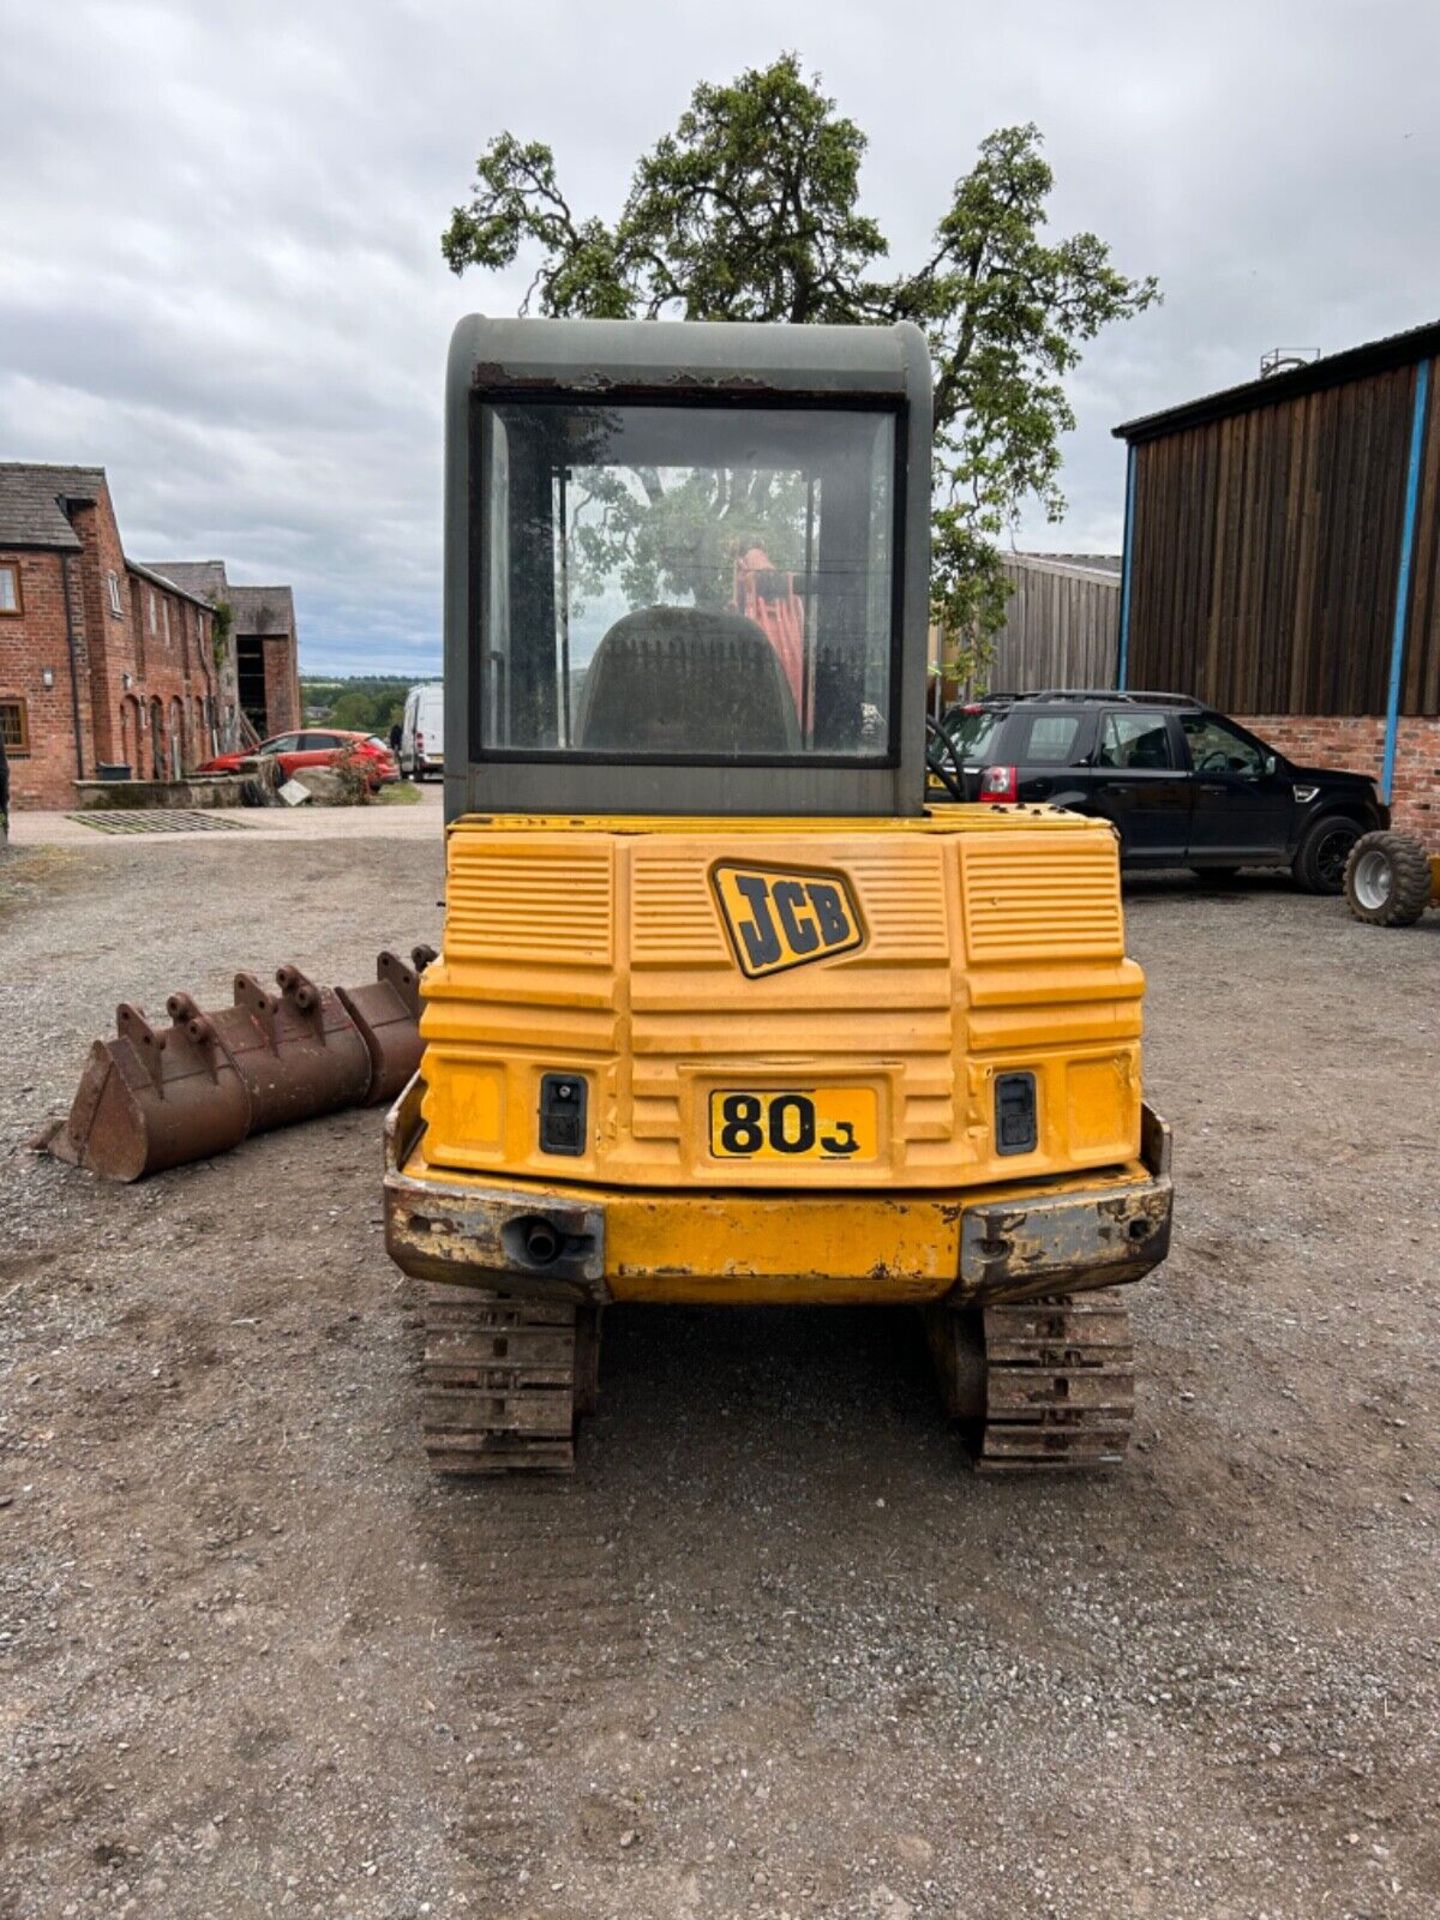 SOLID TRACKS, STRONG DIGGER: 1994 JCB 803 WITH PERKINS ENGINE - Image 5 of 14